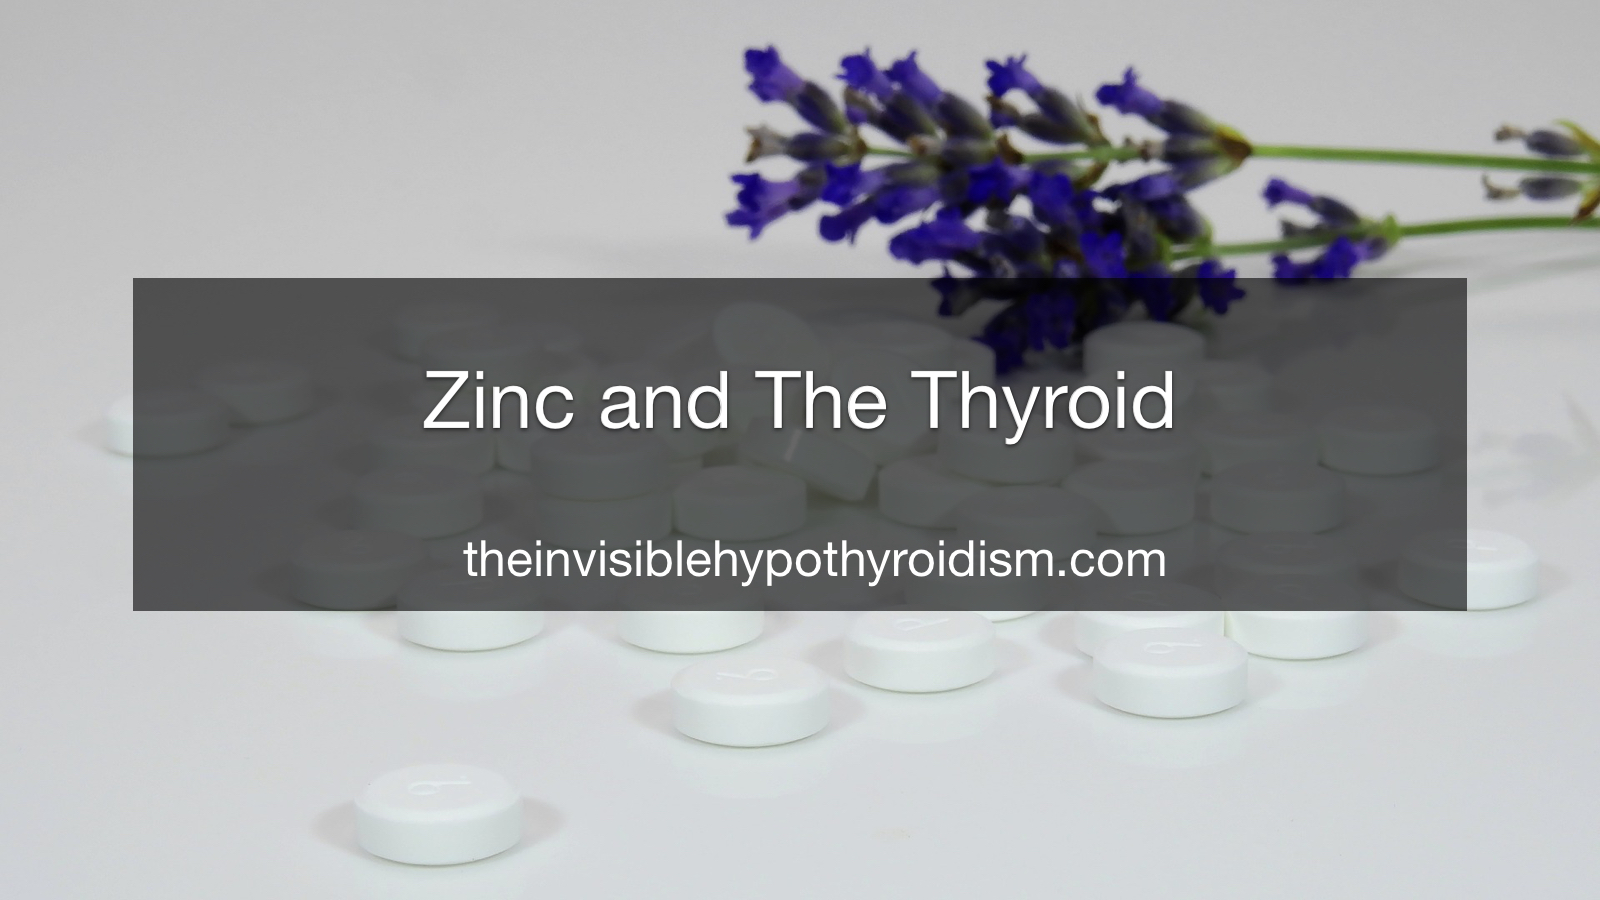 Zinc and The Thyroid